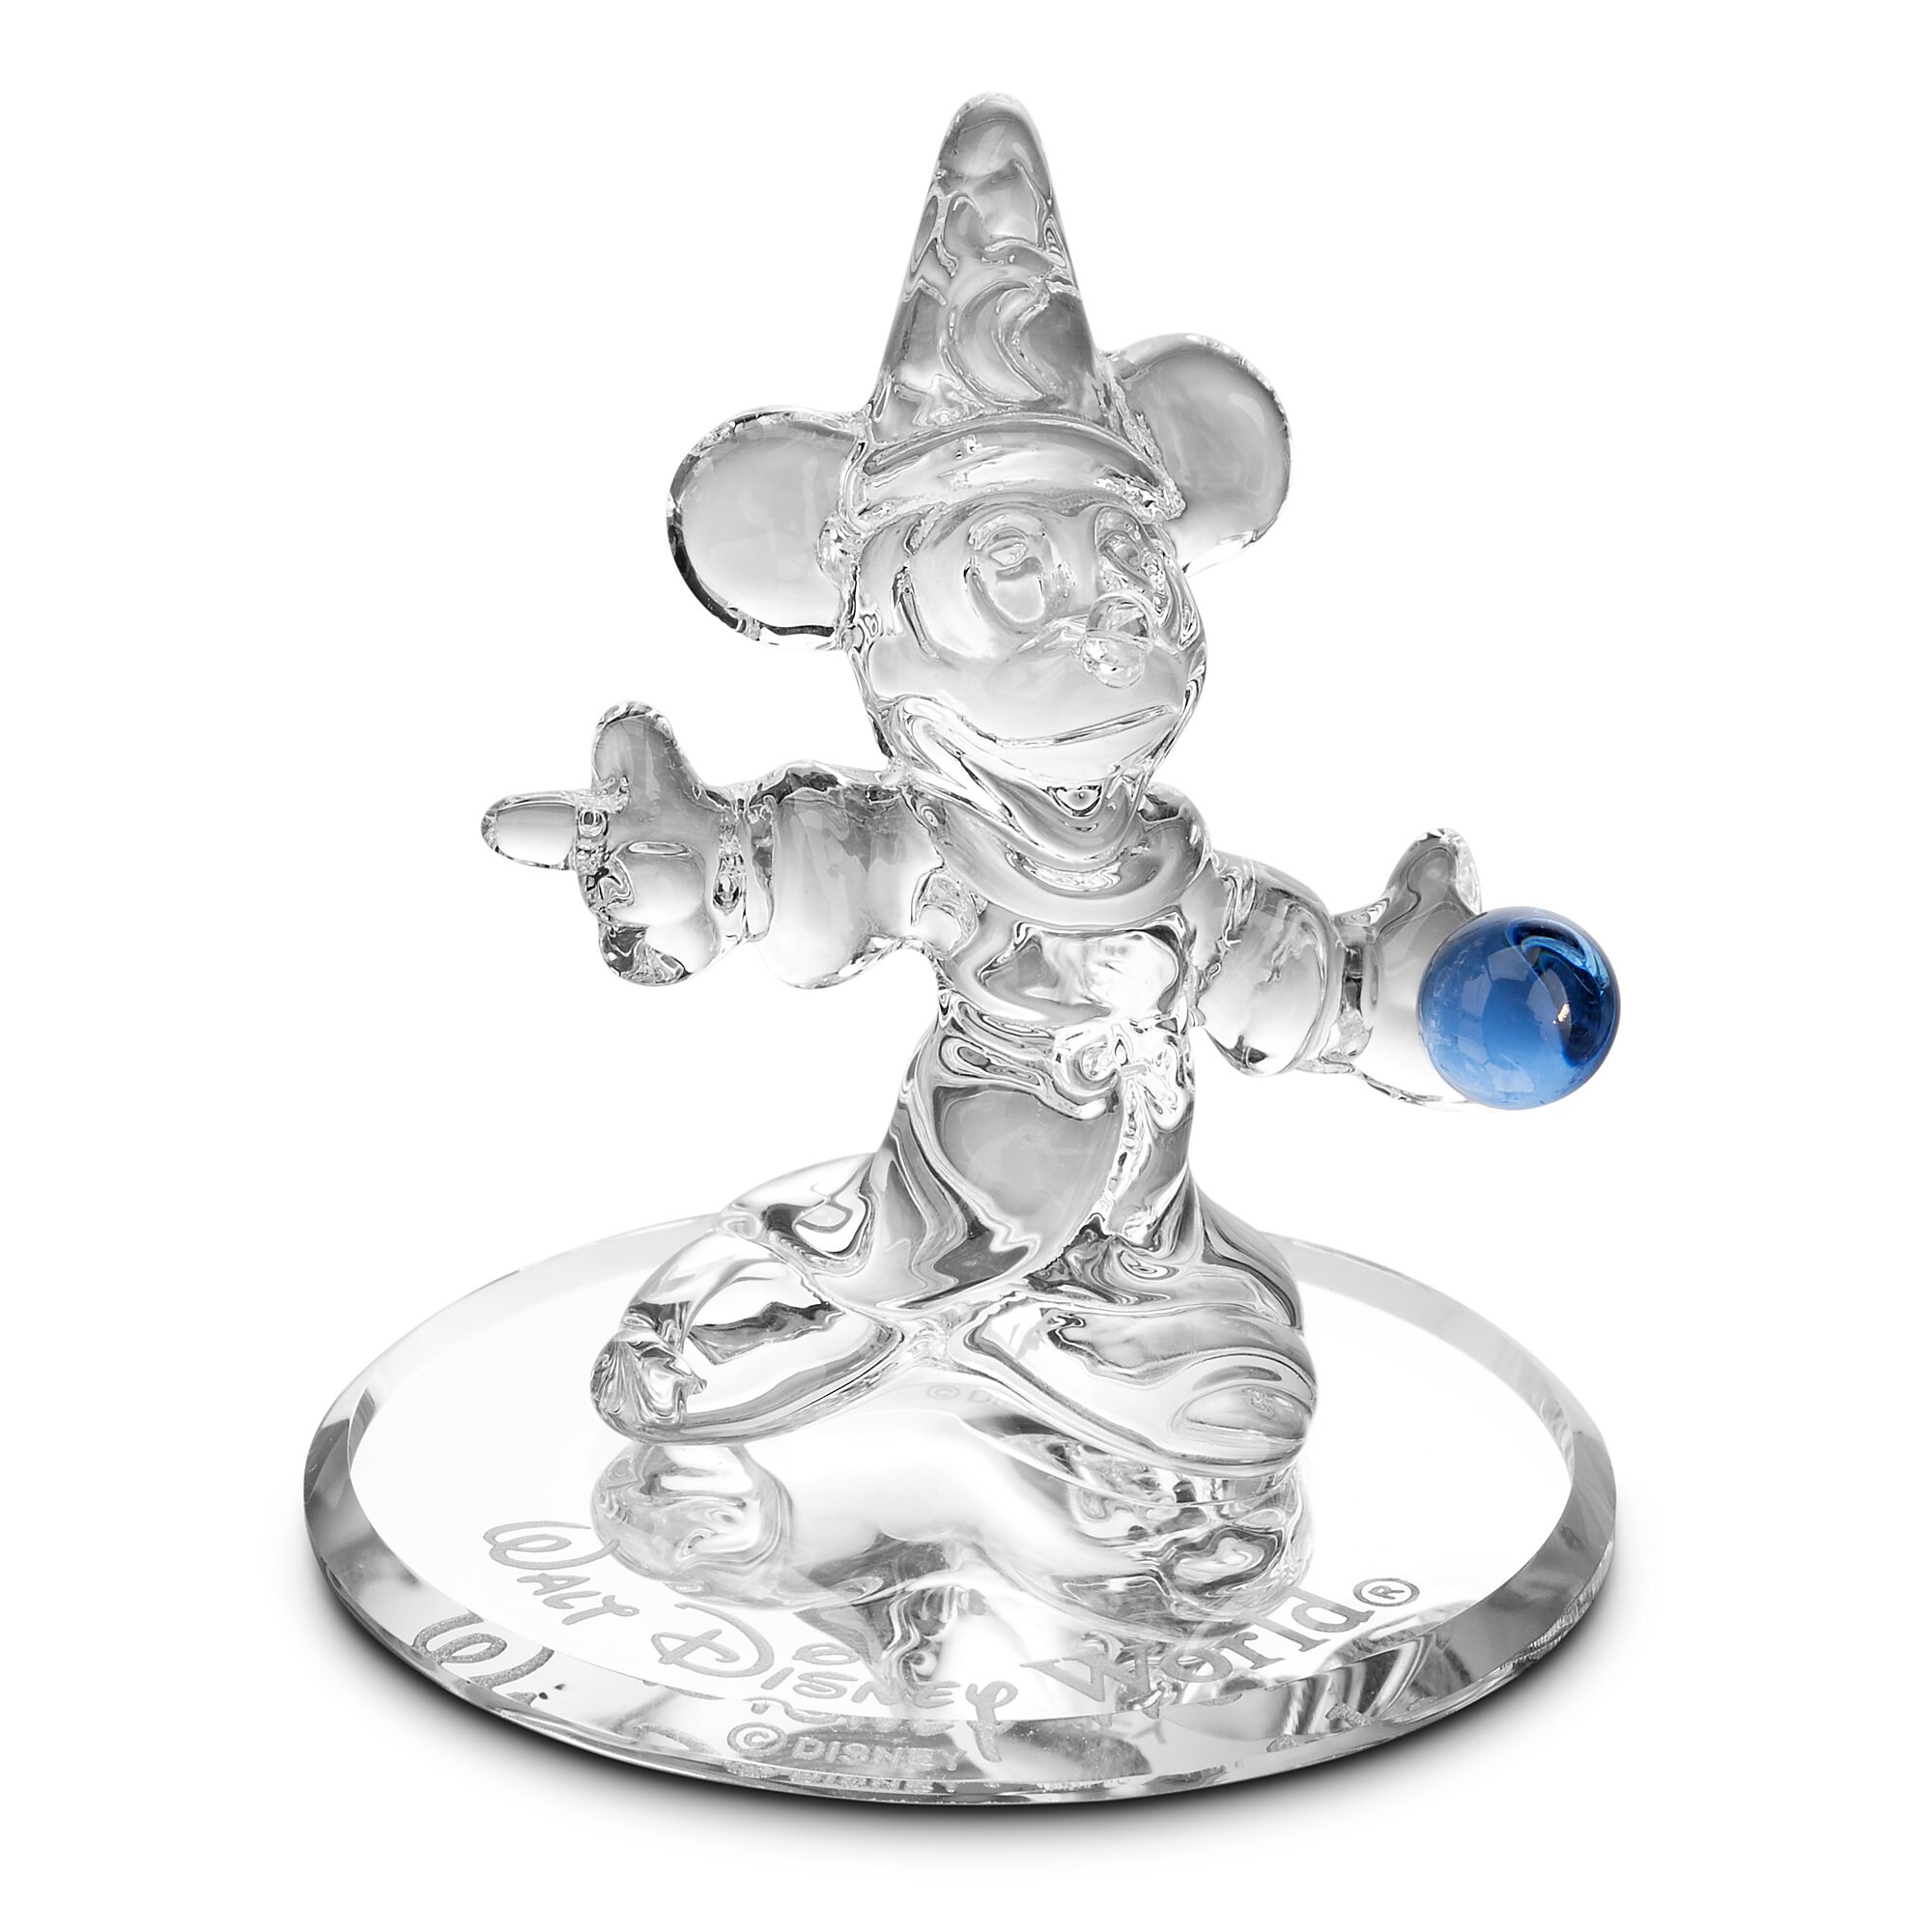 Sorcerer Mickey Mouse Glass Figurine by Arribas